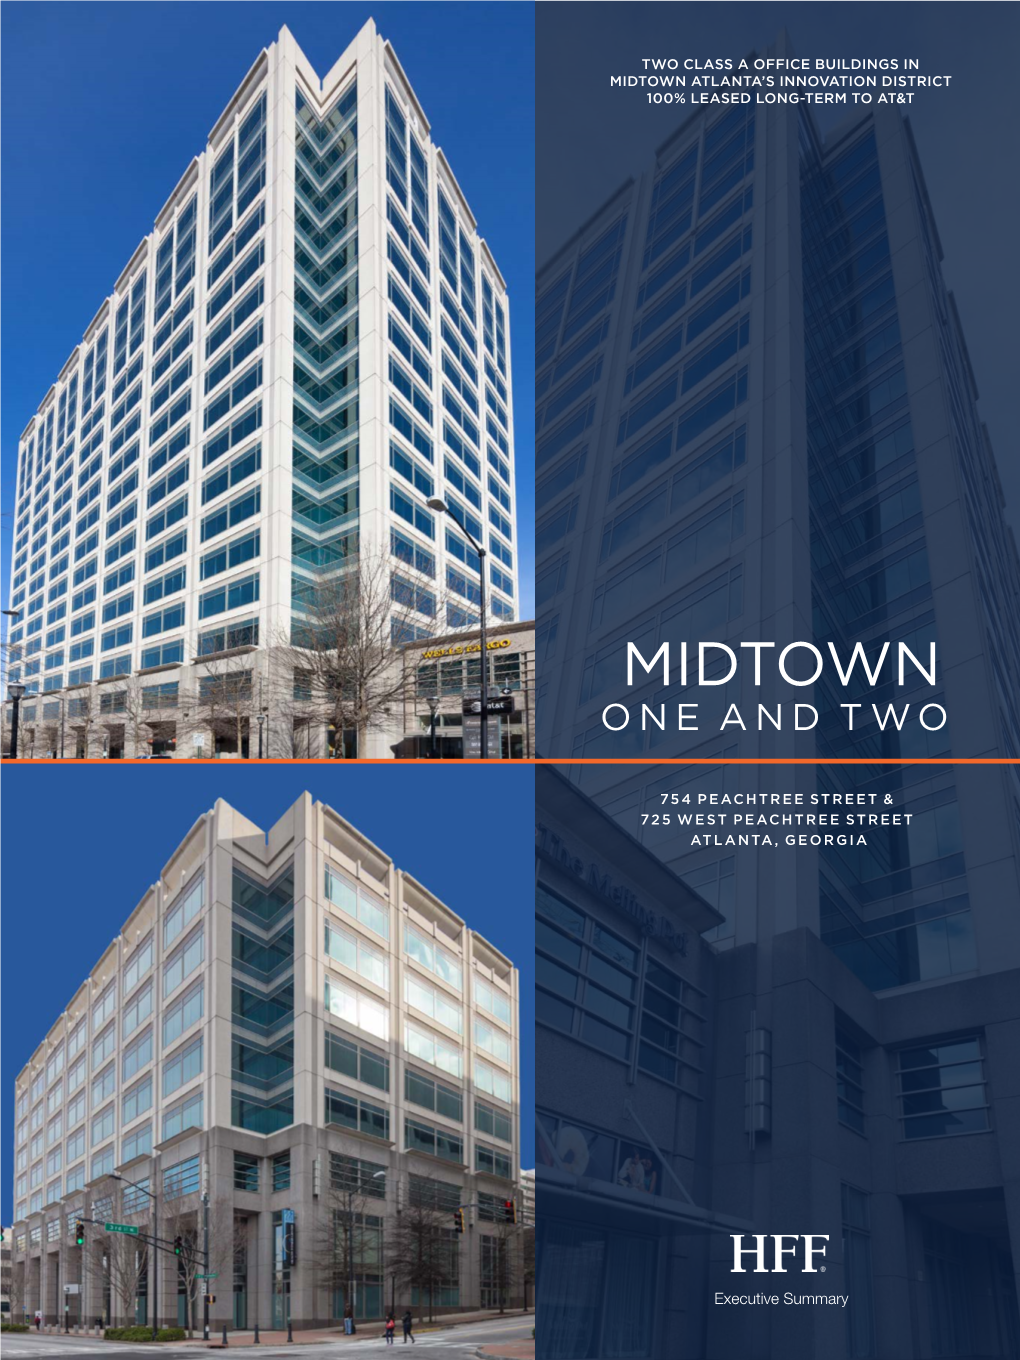 Midtown Atlanta’S Innovation District 100% Leased Long-Term to At&T